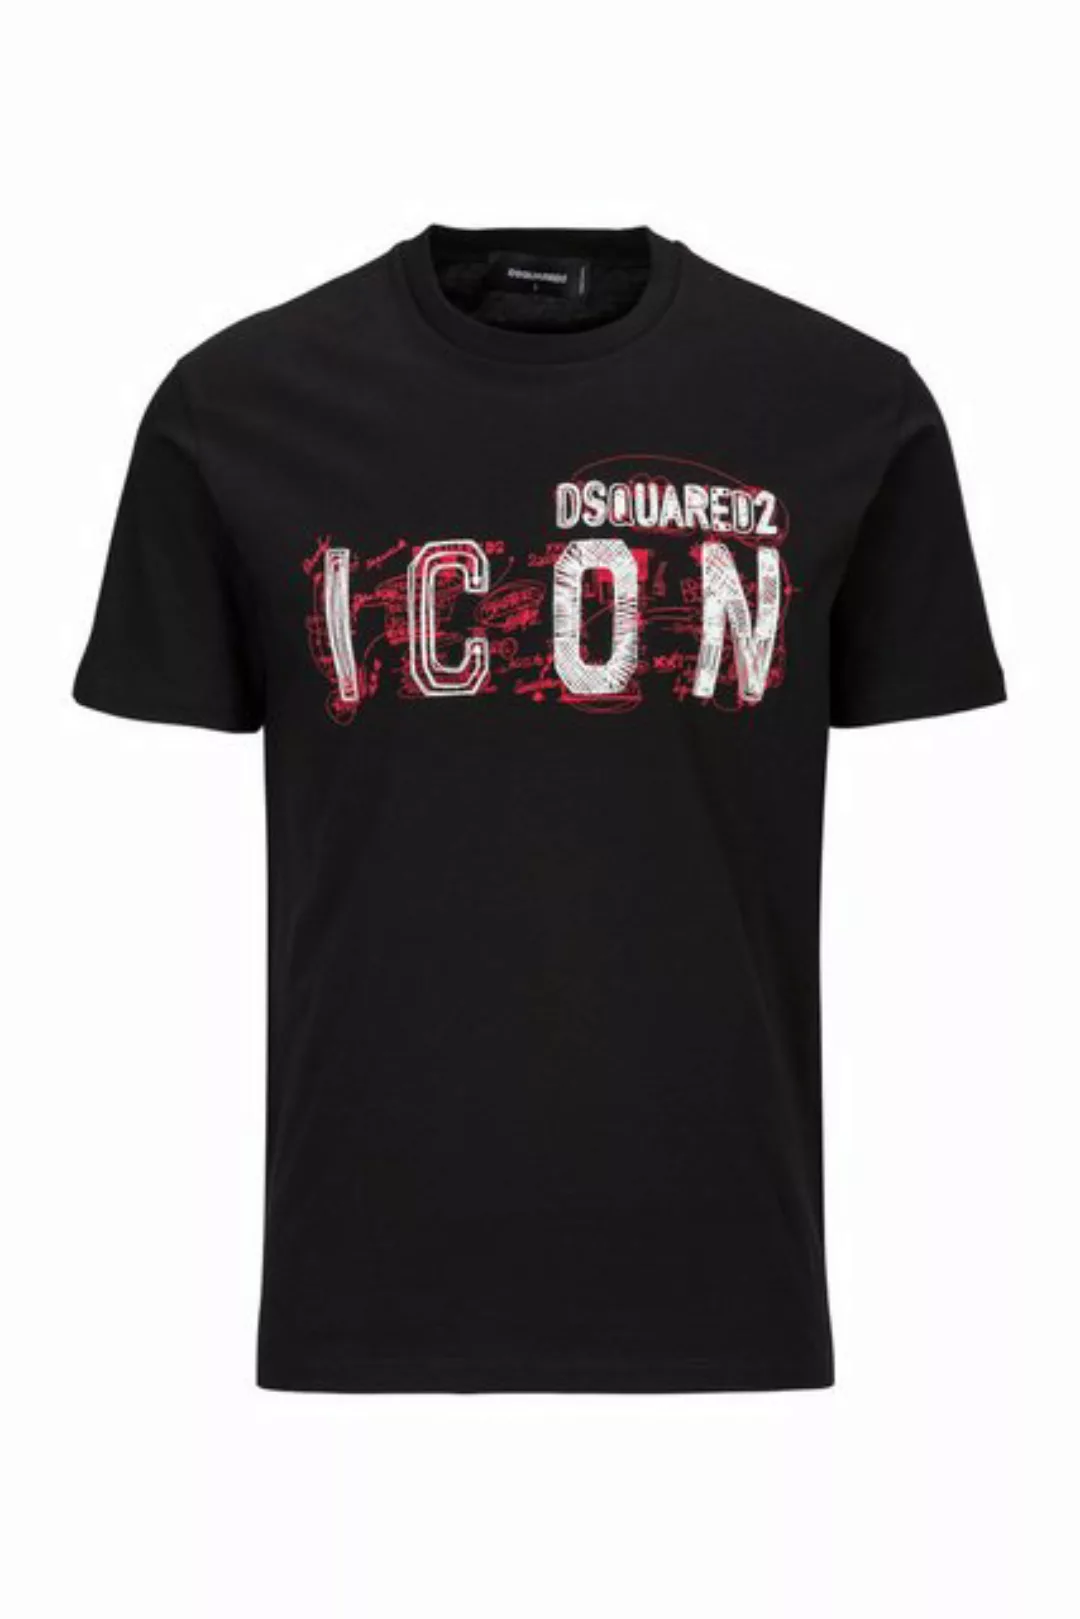 Dsquared2 T-Shirt Icon Scribble Cool Fit Tee günstig online kaufen